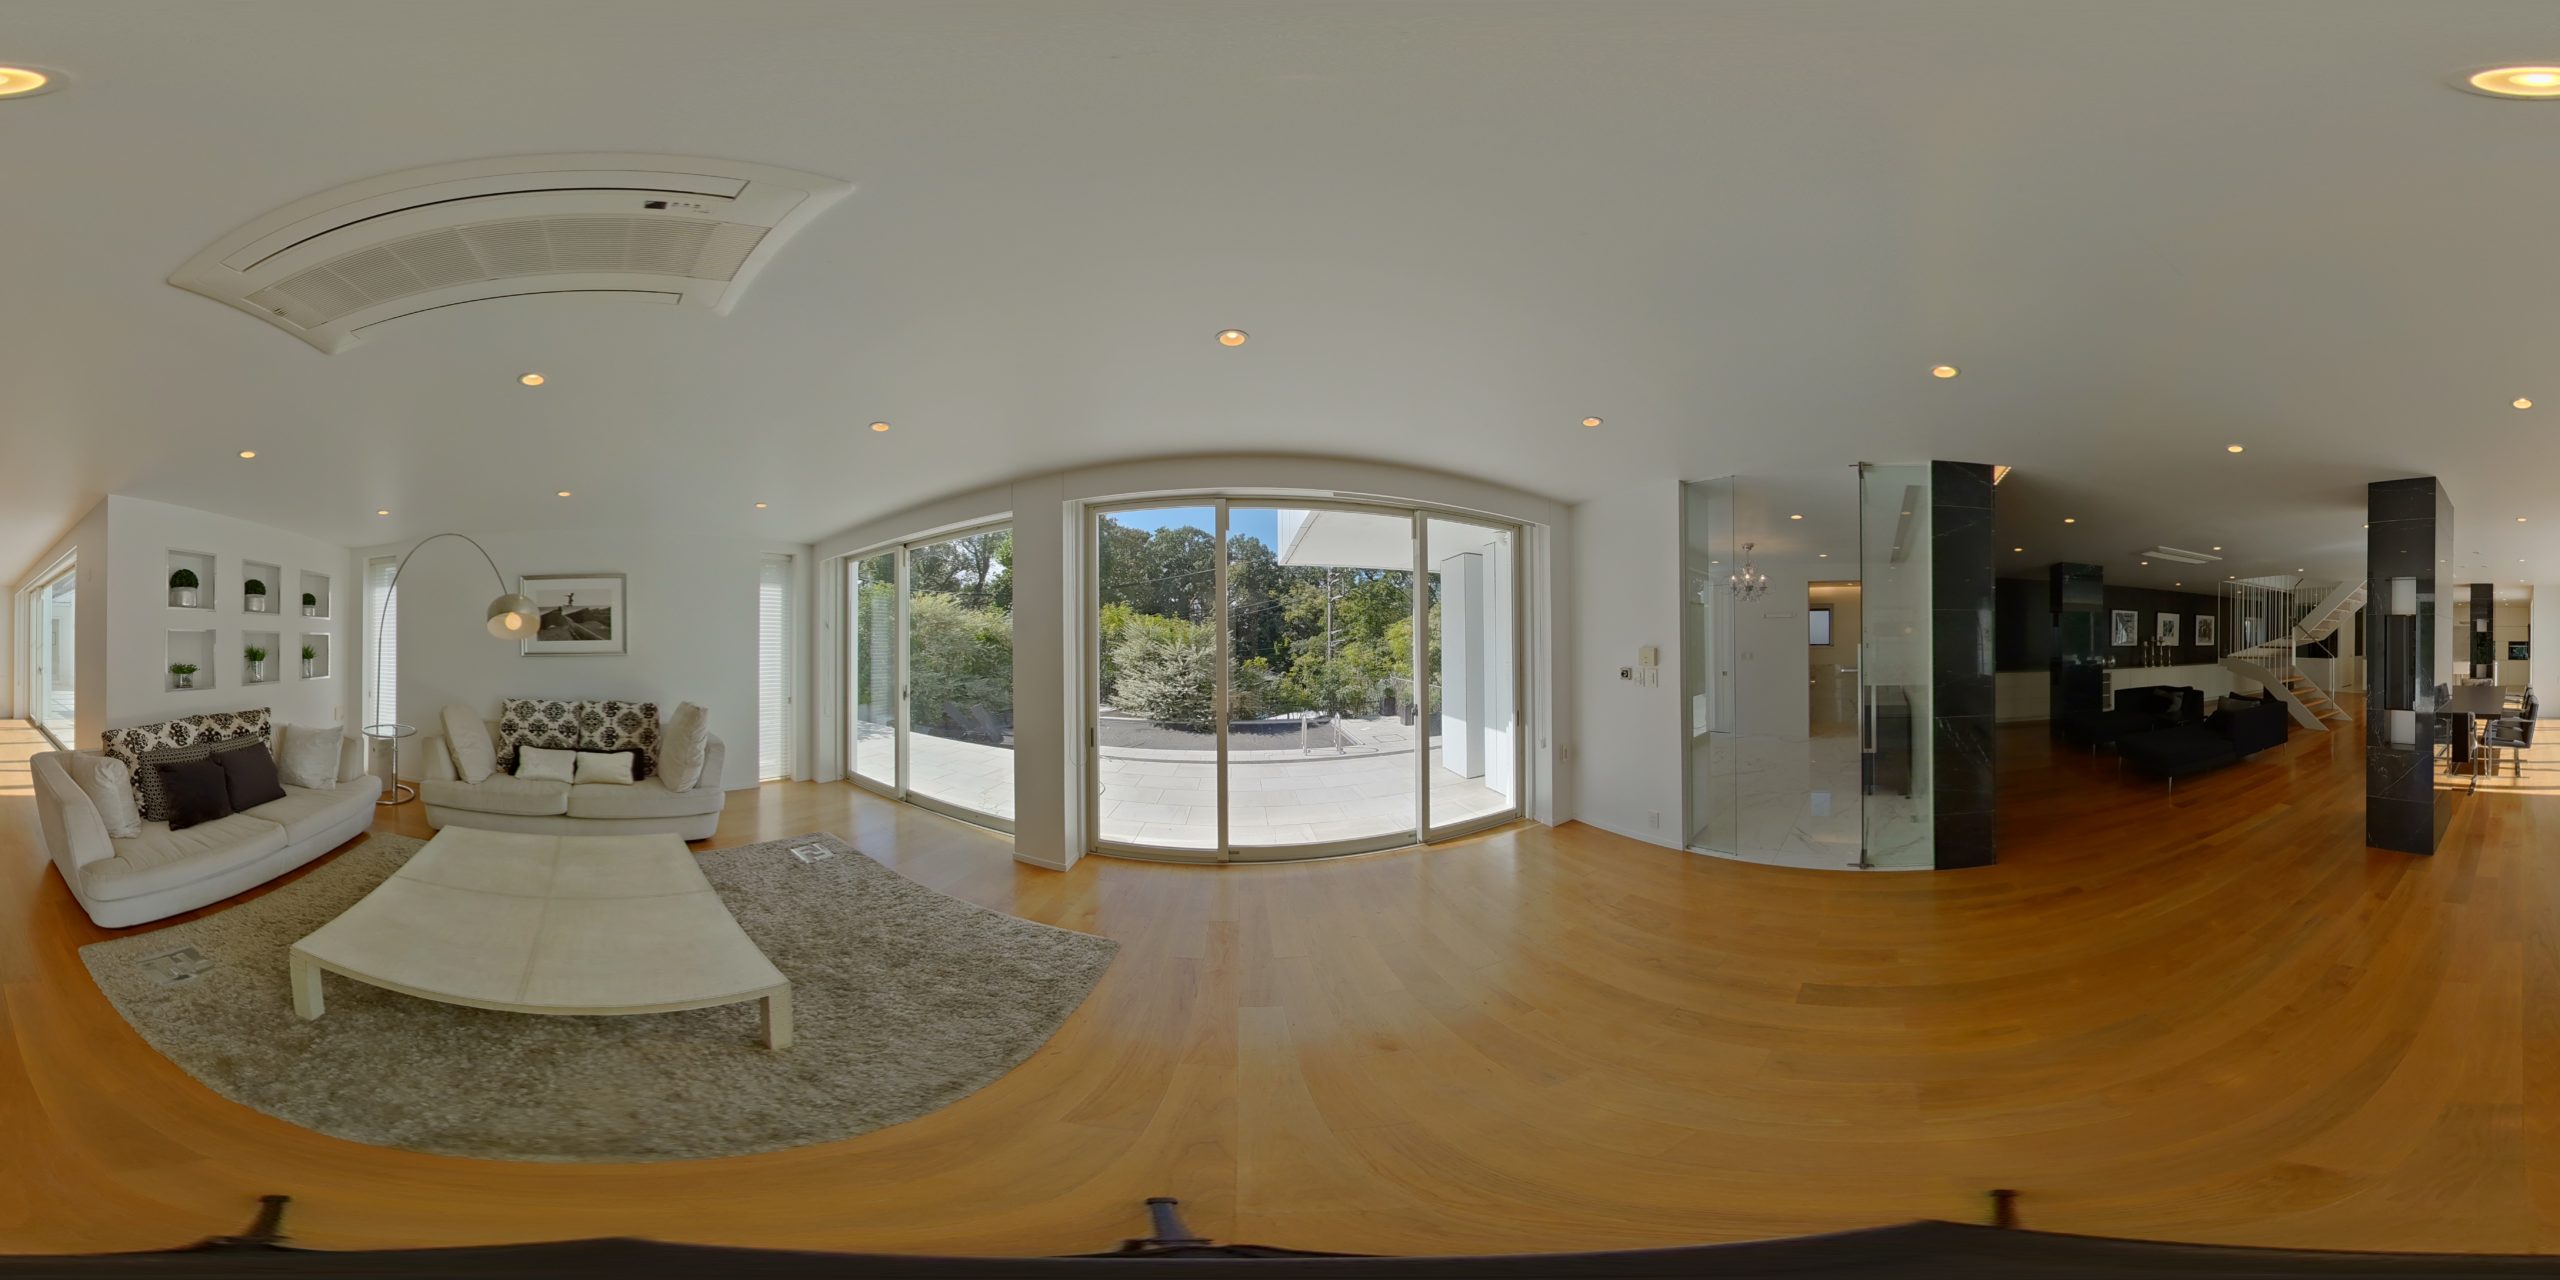 If you've browsed house or Airbnb listings recently, you've experienced one of the more popular uses of 360-degree cameras today. (Image: Ricoh)